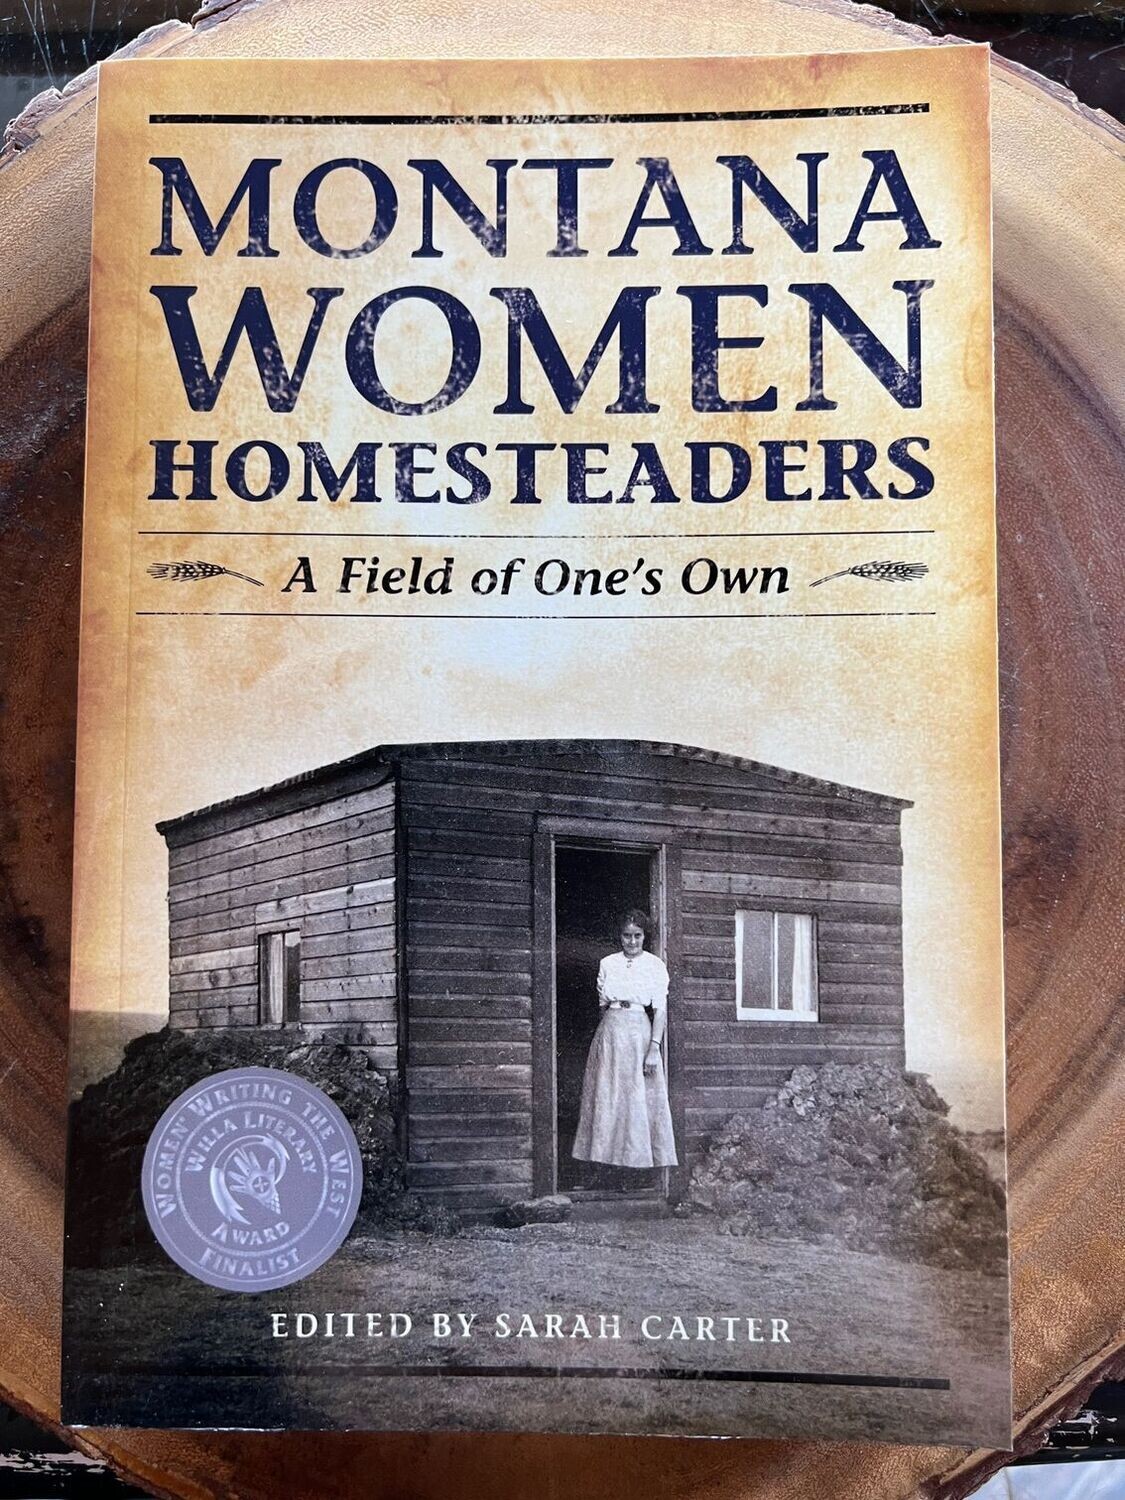 Montana Women Homesteaders: A Field of One's Own edited by Sarah Carter